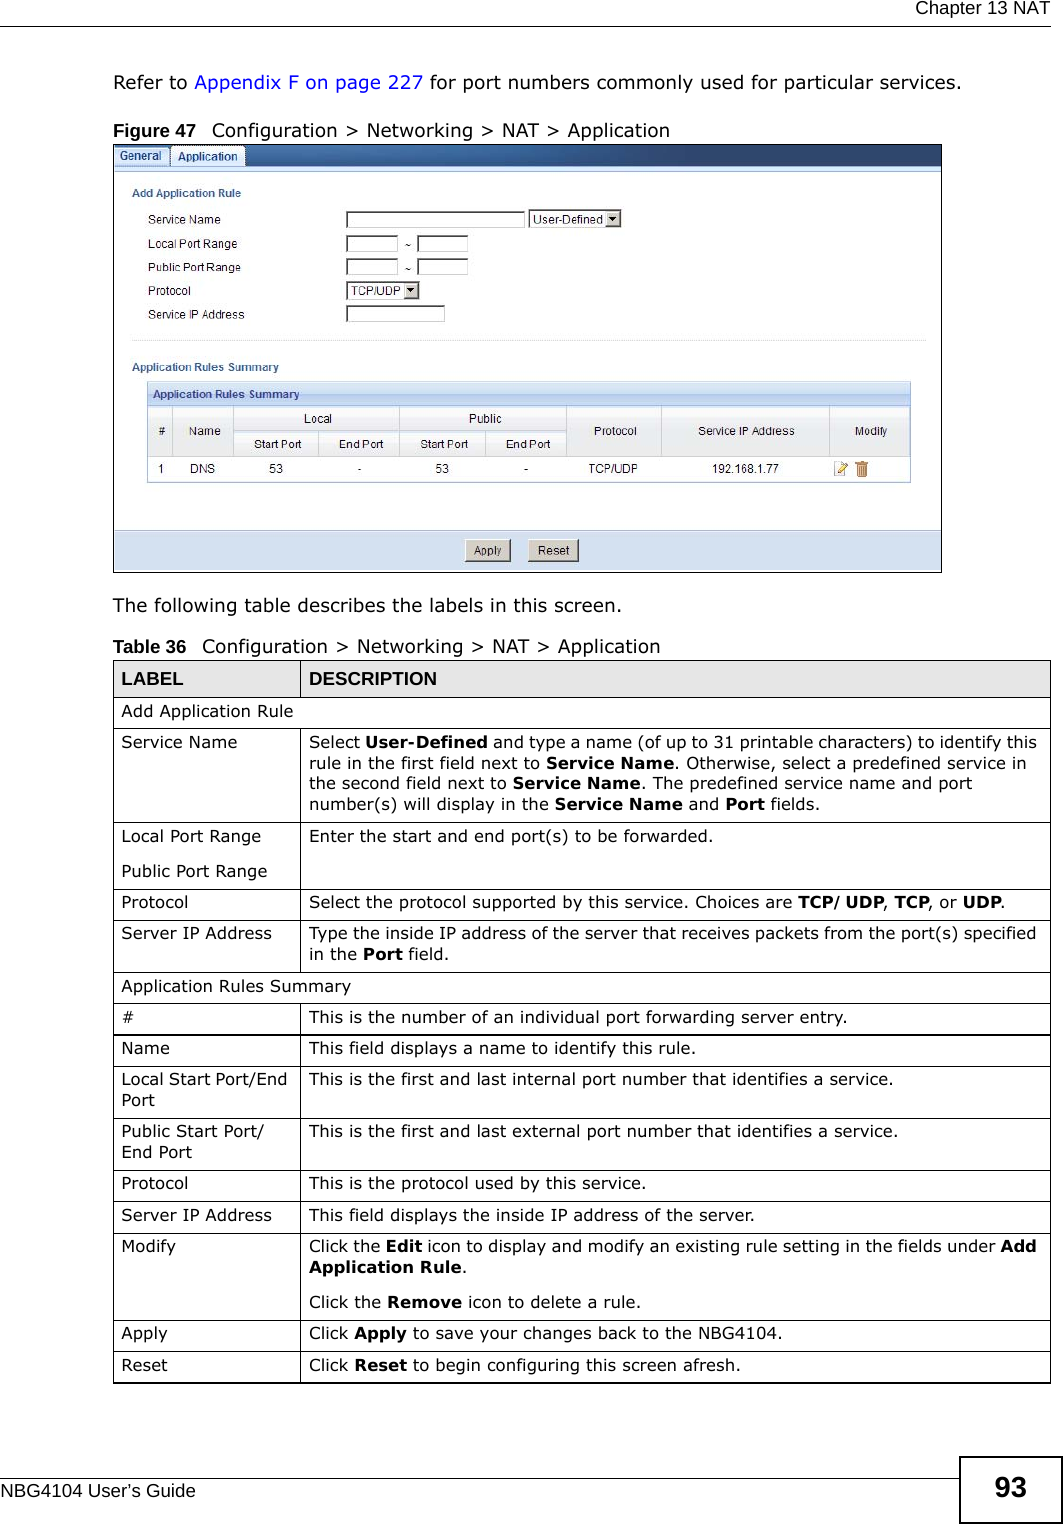  Chapter 13 NATNBG4104 User’s Guide 93Refer to Appendix F on page 227 for port numbers commonly used for particular services.Figure 47   Configuration &gt; Networking &gt; NAT &gt; Application The following table describes the labels in this screen.Table 36   Configuration &gt; Networking &gt; NAT &gt; ApplicationLABEL DESCRIPTIONAdd Application RuleService Name Select User-Defined and type a name (of up to 31 printable characters) to identify this rule in the first field next to Service Name. Otherwise, select a predefined service in the second field next to Service Name. The predefined service name and port number(s) will display in the Service Name and Port fields.Local Port RangePublic Port Range Enter the start and end port(s) to be forwarded.Protocol Select the protocol supported by this service. Choices are TCP/UDP, TCP, or UDP.Server IP Address Type the inside IP address of the server that receives packets from the port(s) specified in the Port field.Application Rules Summary#This is the number of an individual port forwarding server entry.Name This field displays a name to identify this rule.Local Start Port/End PortThis is the first and last internal port number that identifies a service.Public Start Port/End PortThis is the first and last external port number that identifies a service.Protocol This is the protocol used by this service. Server IP Address This field displays the inside IP address of the server.Modify Click the Edit icon to display and modify an existing rule setting in the fields under Add Application Rule. Click the Remove icon to delete a rule.Apply Click Apply to save your changes back to the NBG4104.Reset Click Reset to begin configuring this screen afresh.